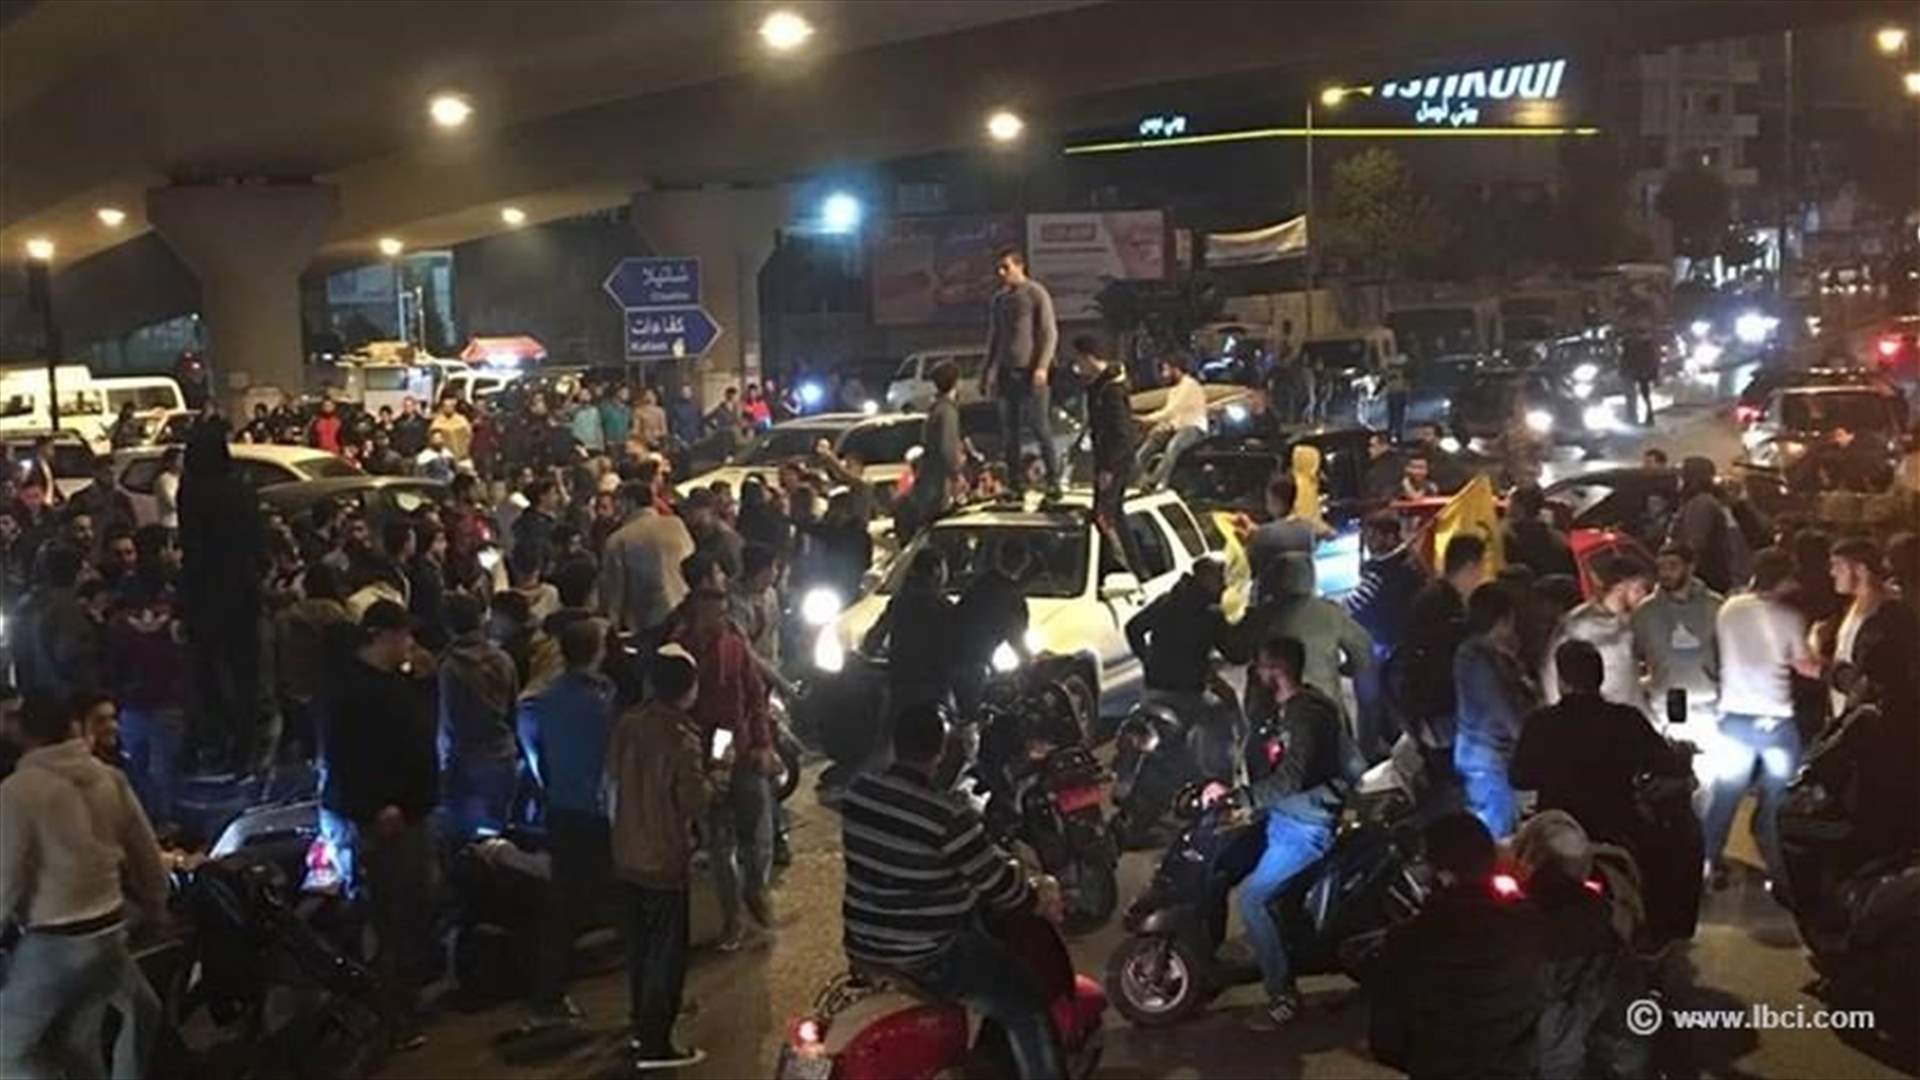 REPORT: Hezbollah supporters block roads to protest Nasrallah sketch